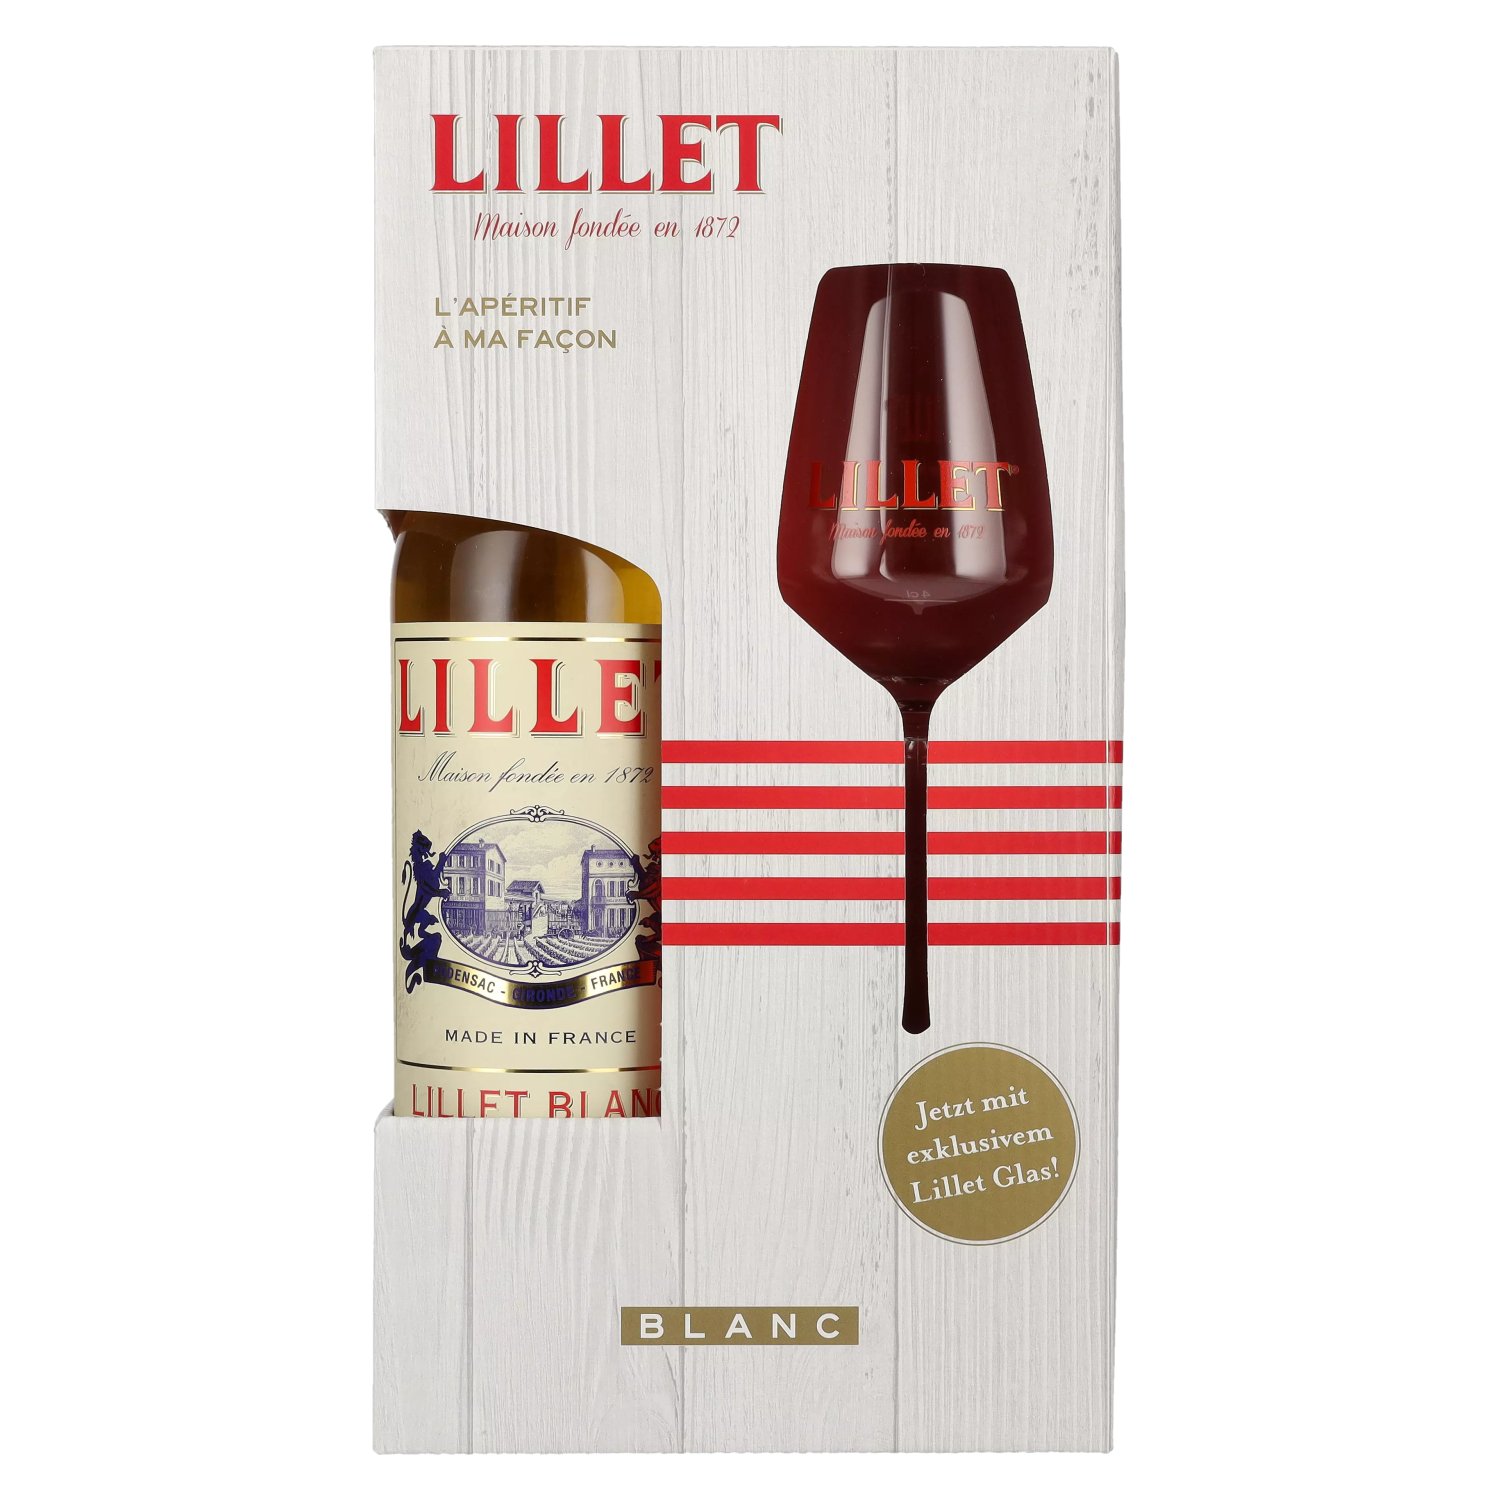 Lillet Blanc 17% Giftbox glass 0,75l Vol. in with